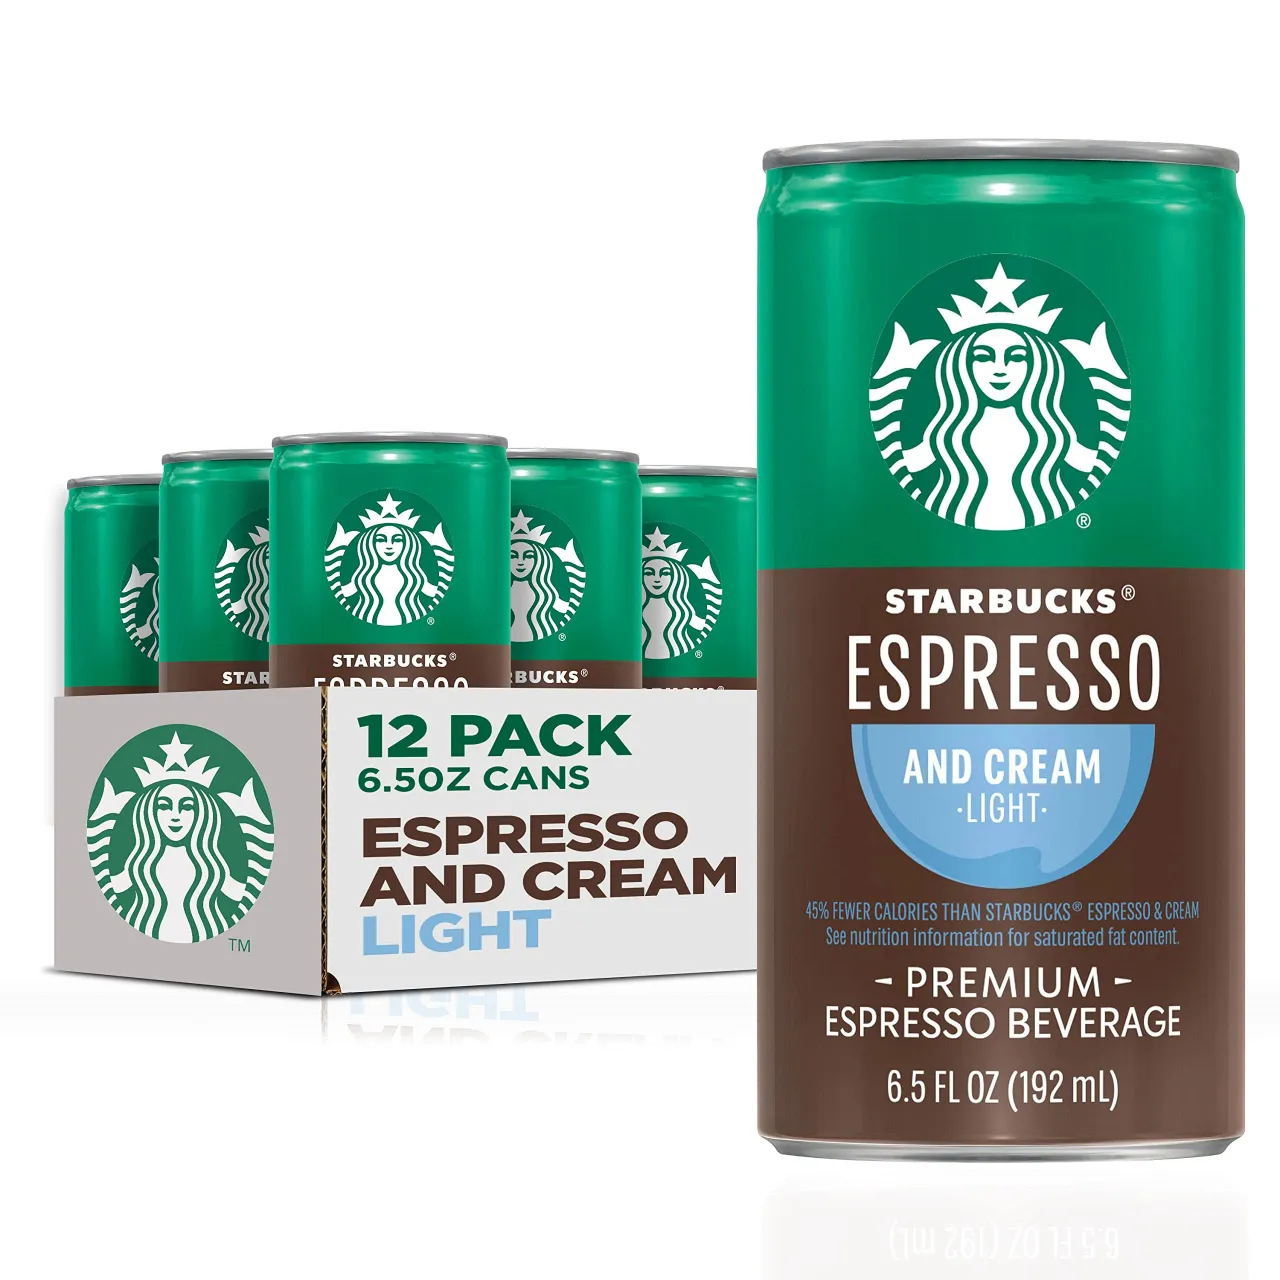 4 Starbucks Ready to Drink Coffee, Espresso & Cream Light , 6.5oz Cans (12 Pack) (Packaging May Vary)